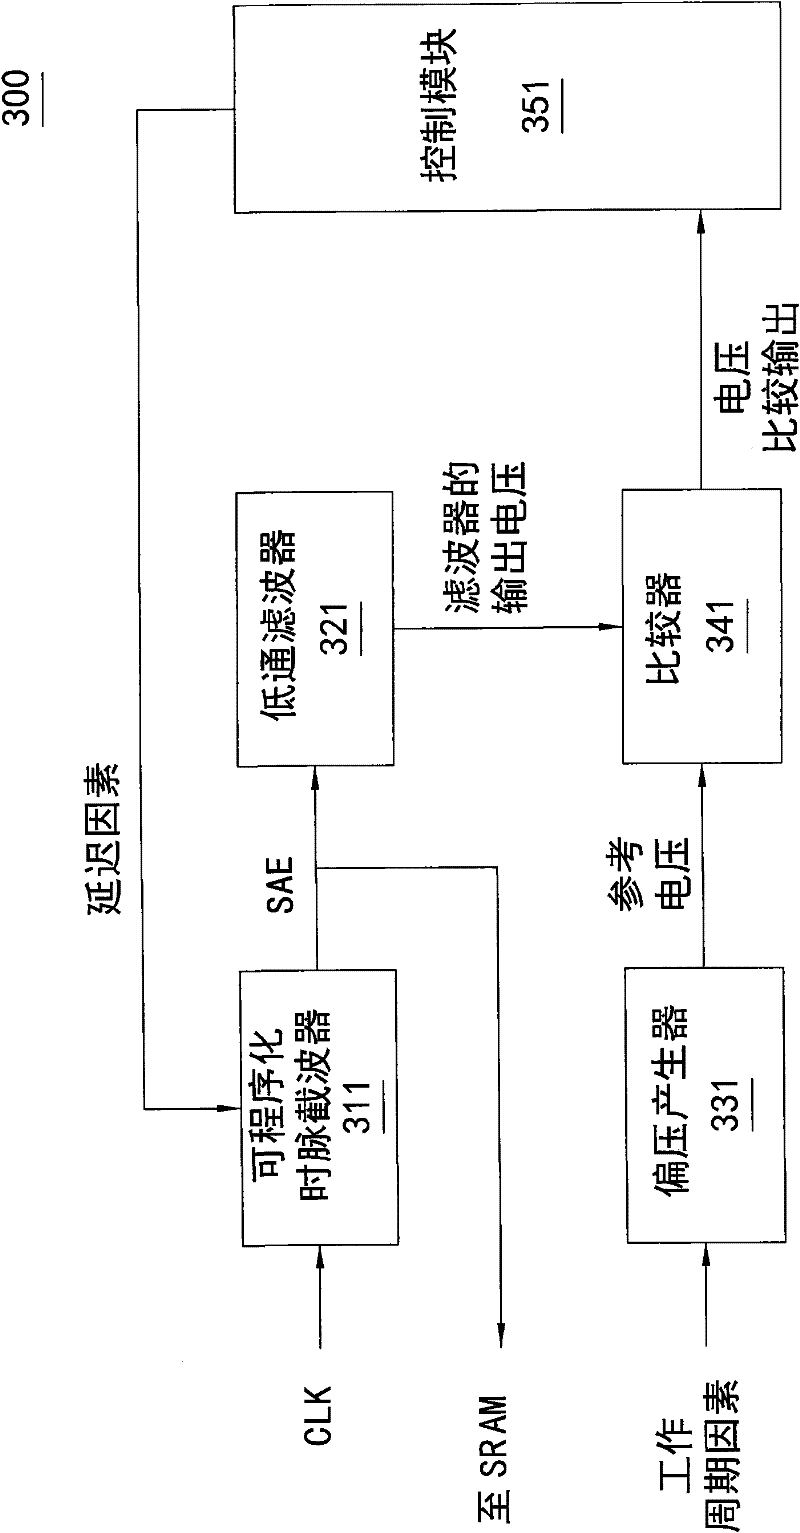 Sense amplifier enable signal generation device, method, and system